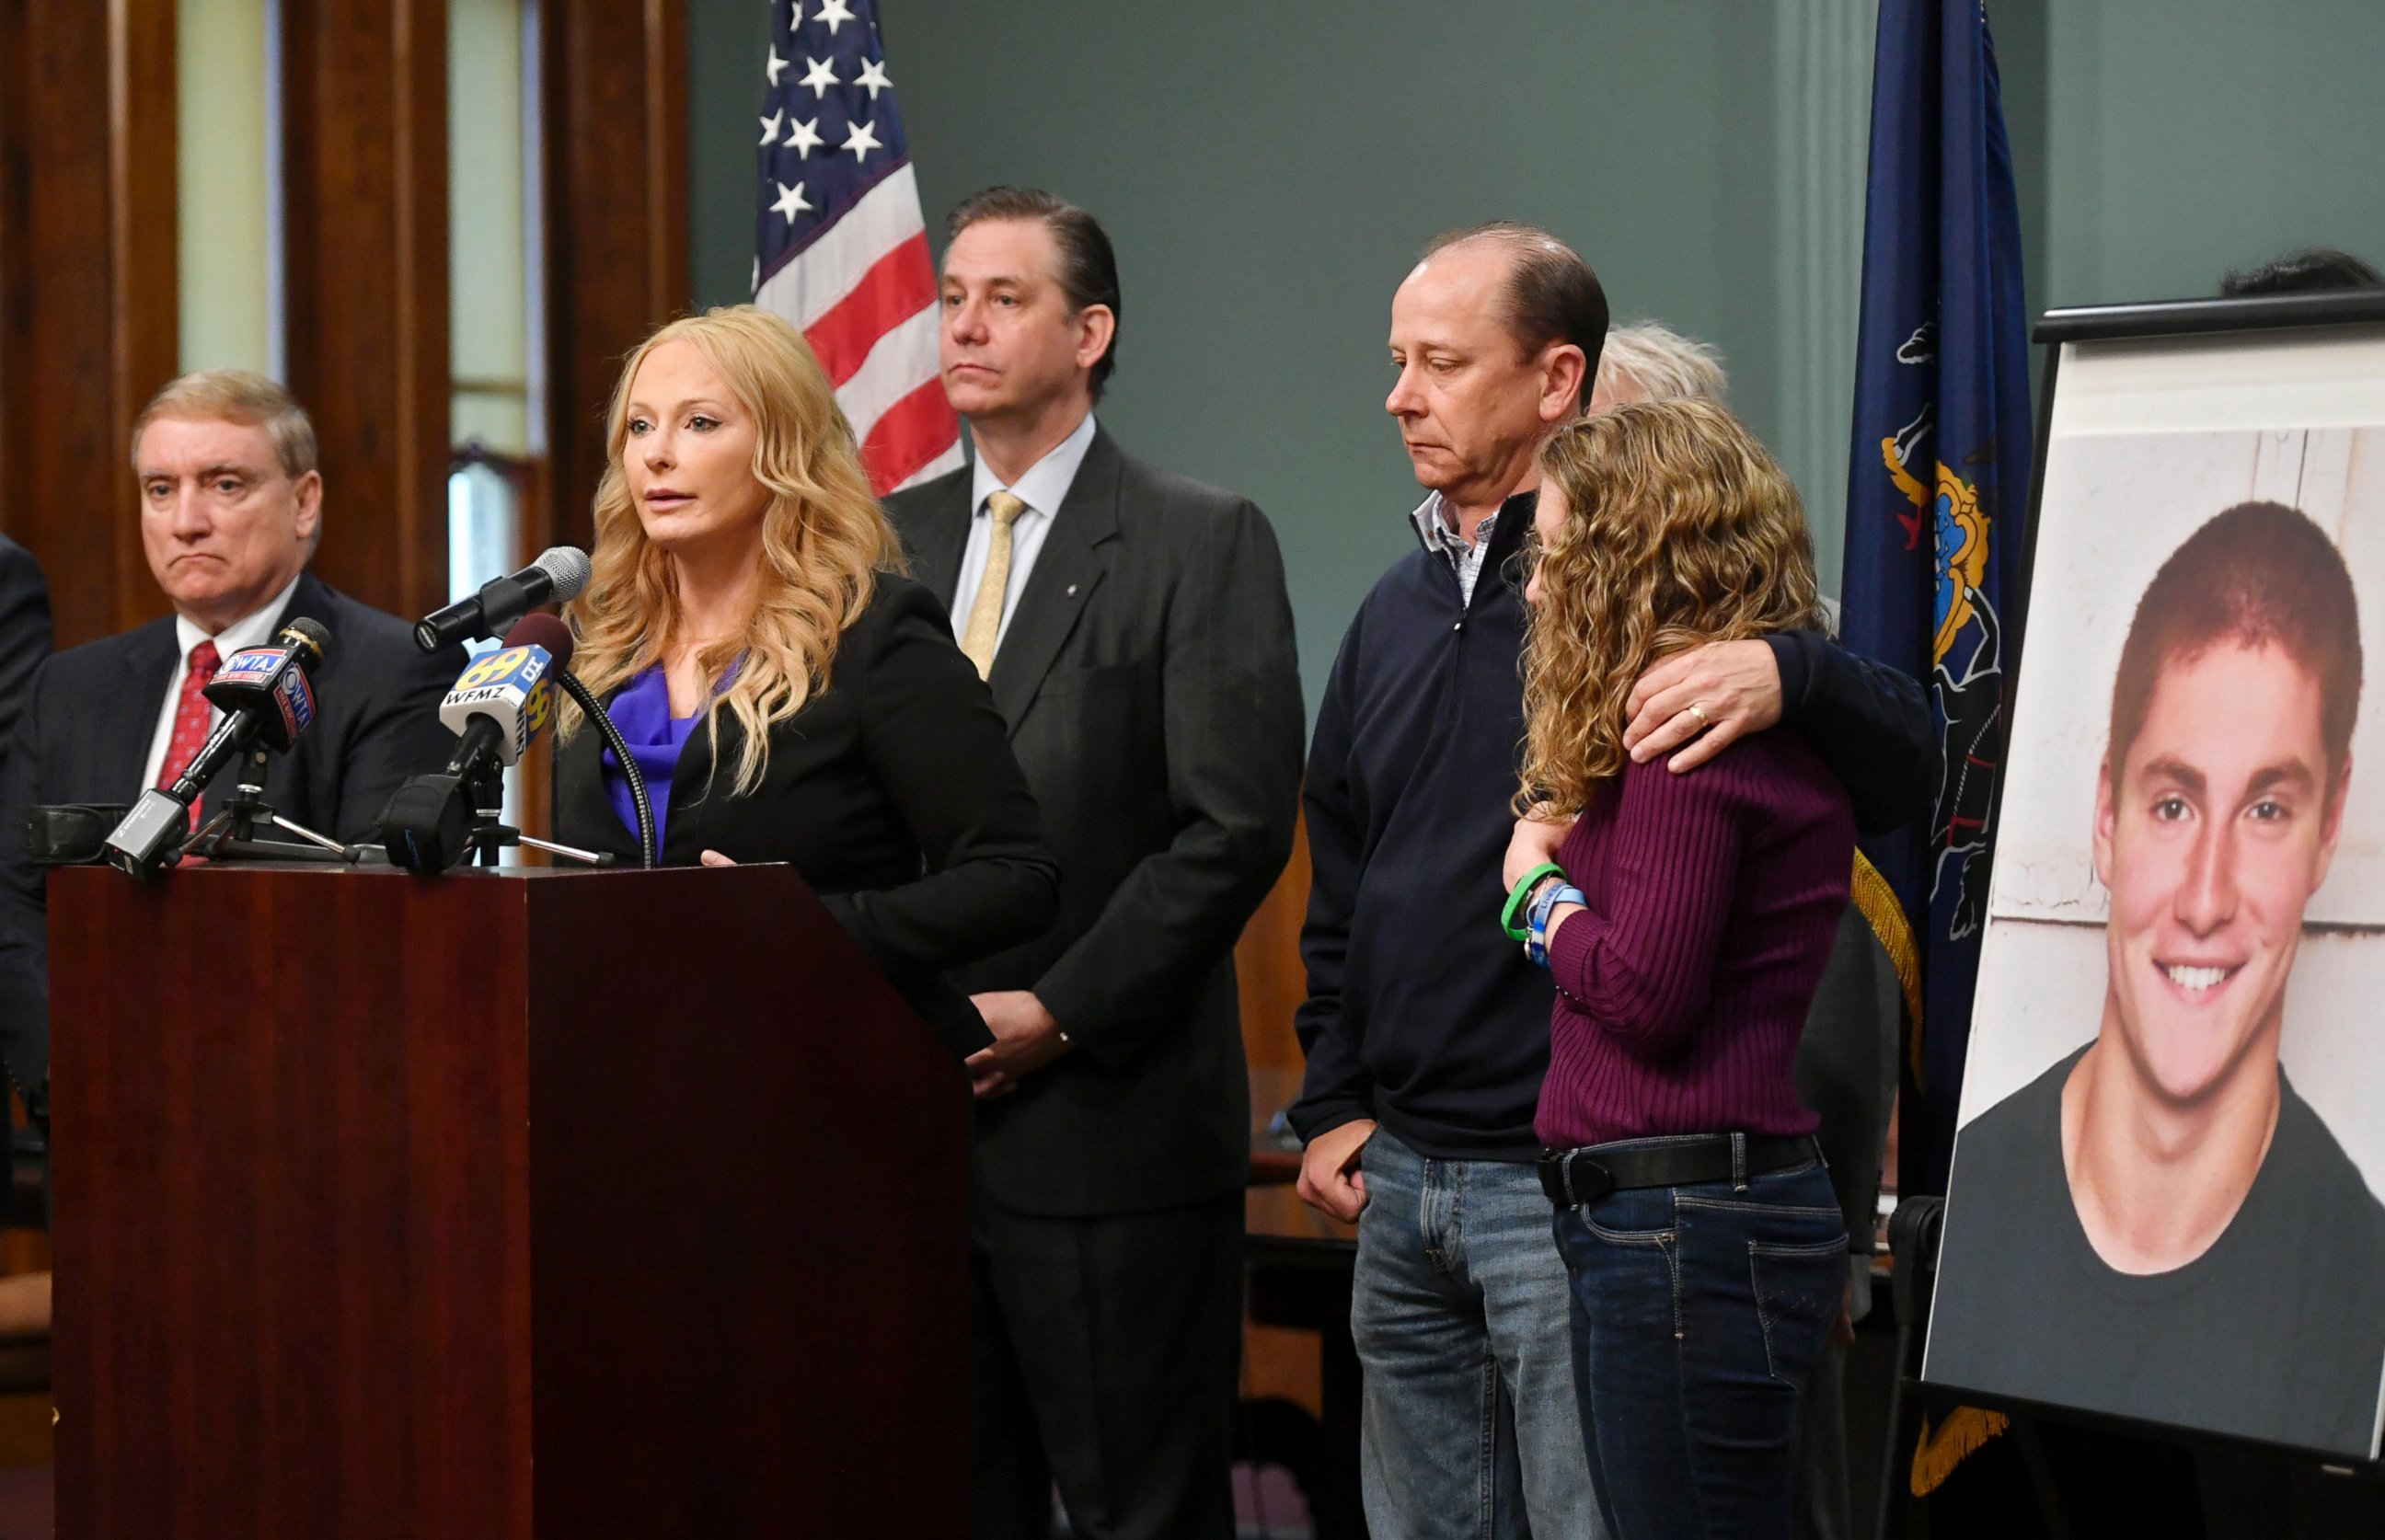 Jim and Evelyn Piazza, right, stand by as Centre County District Attorney Stacy Parks Miller, second from left, announces the results of an investigation into the death of their son Timothy Piazza during a press conference, May 5, 2017, in Bellefonte, Pa.